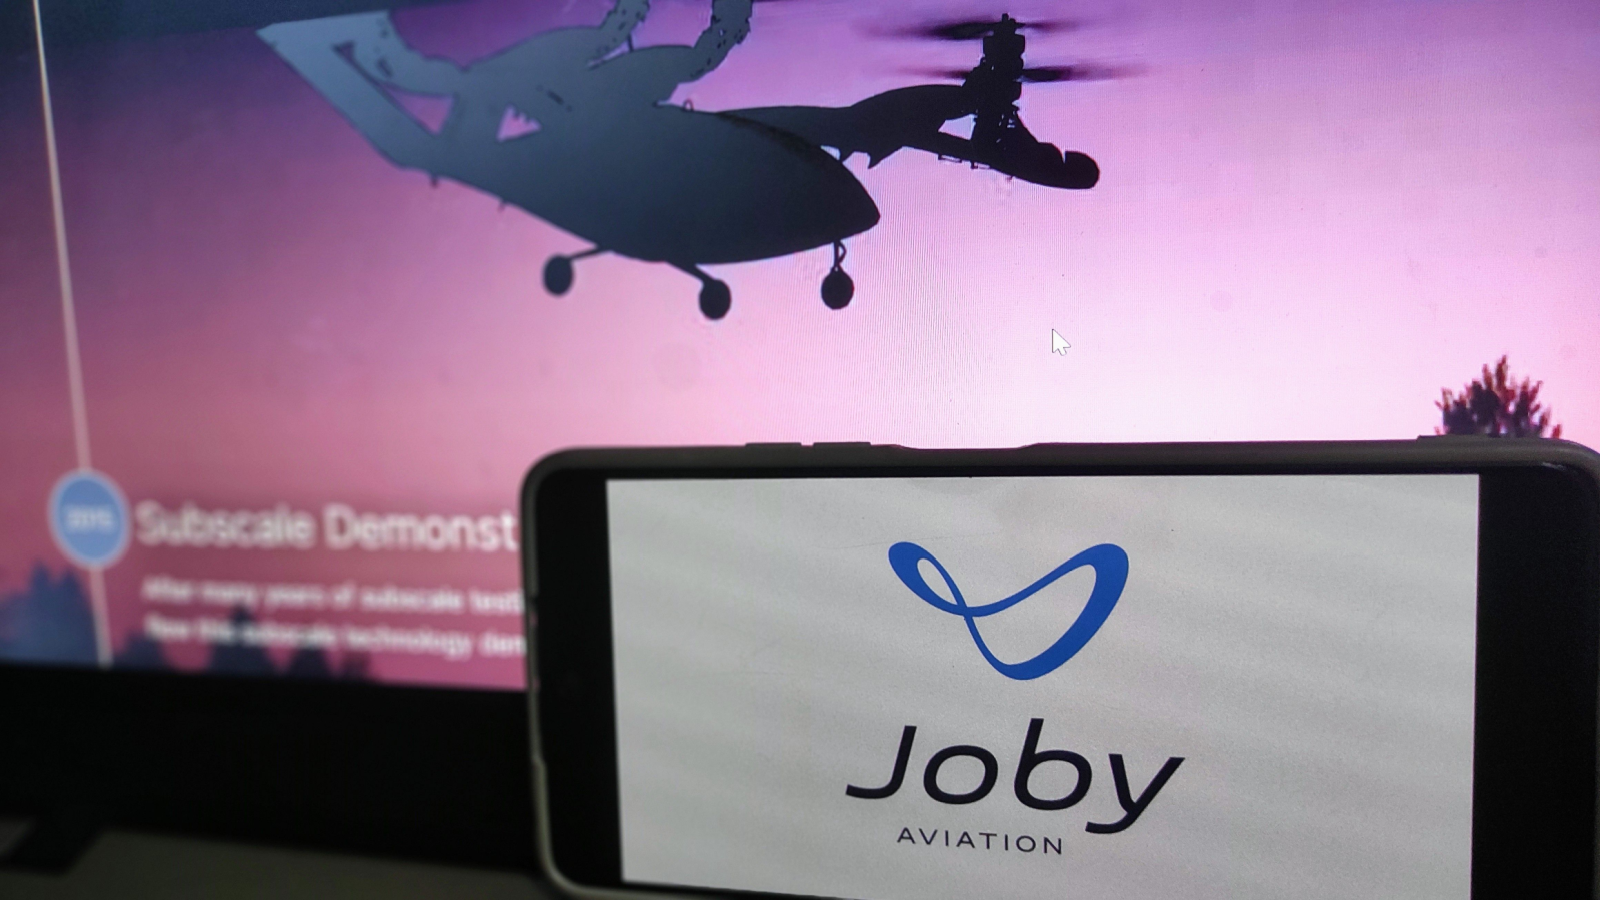 Joby Aviation: A High-Flying Opportunity for Speculative Investors?